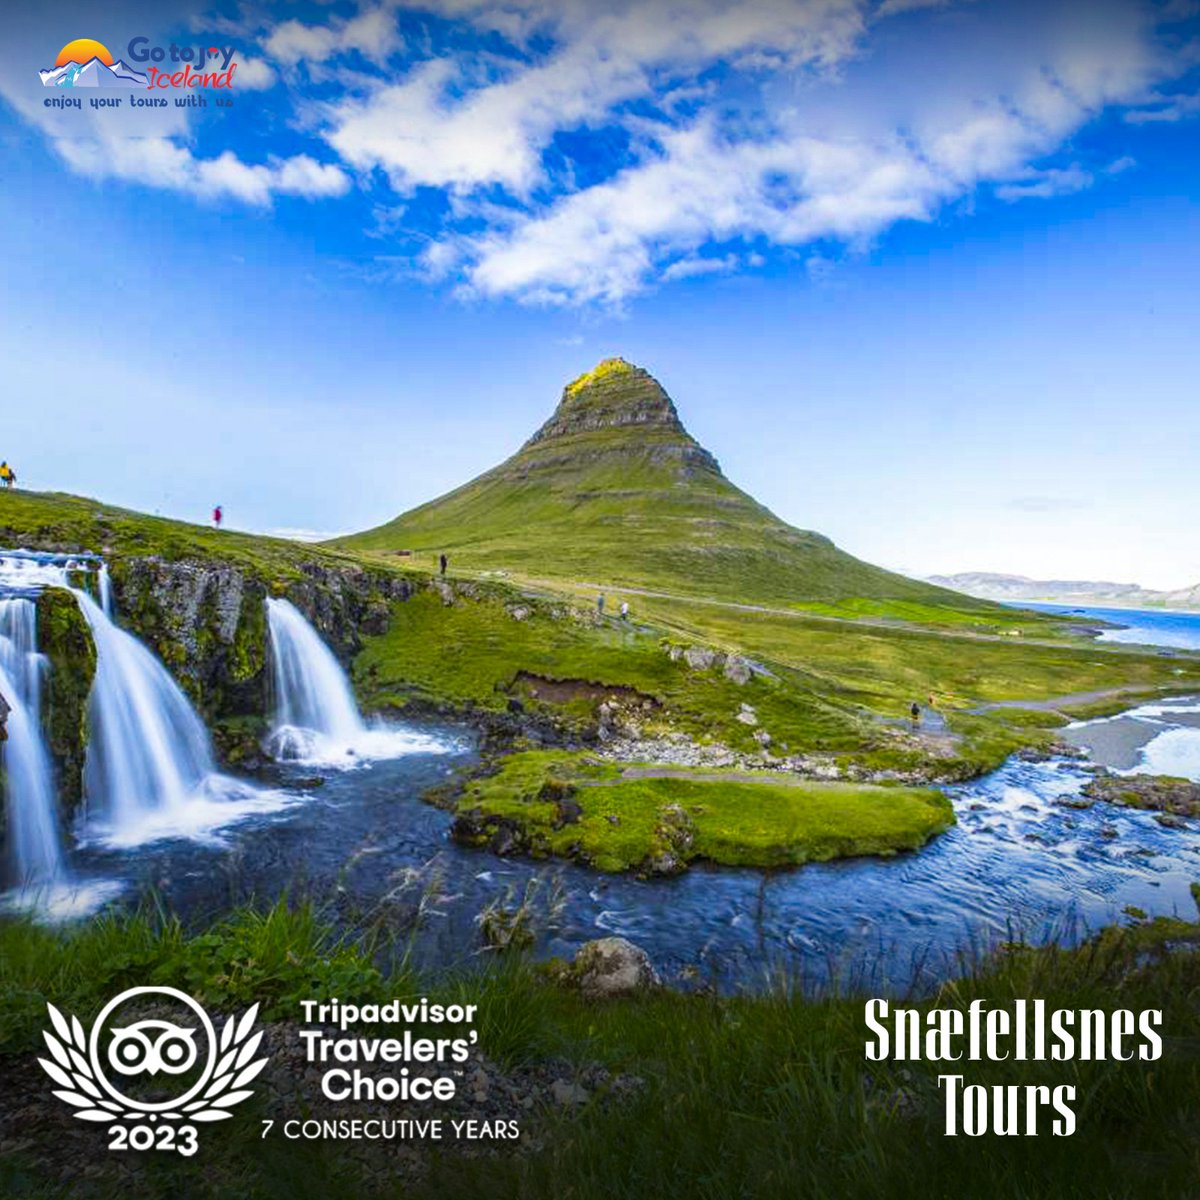 Explore the spectacular scenery and astounding natural beauty of the Snaefellsnes peninsula as you journey across its remarkable vistas 😍

Book 👉 gotojoyiceland.com

#iceland #nature #travel #photography #visiticeland #visitingiceland #traveliceland #icelandtravel